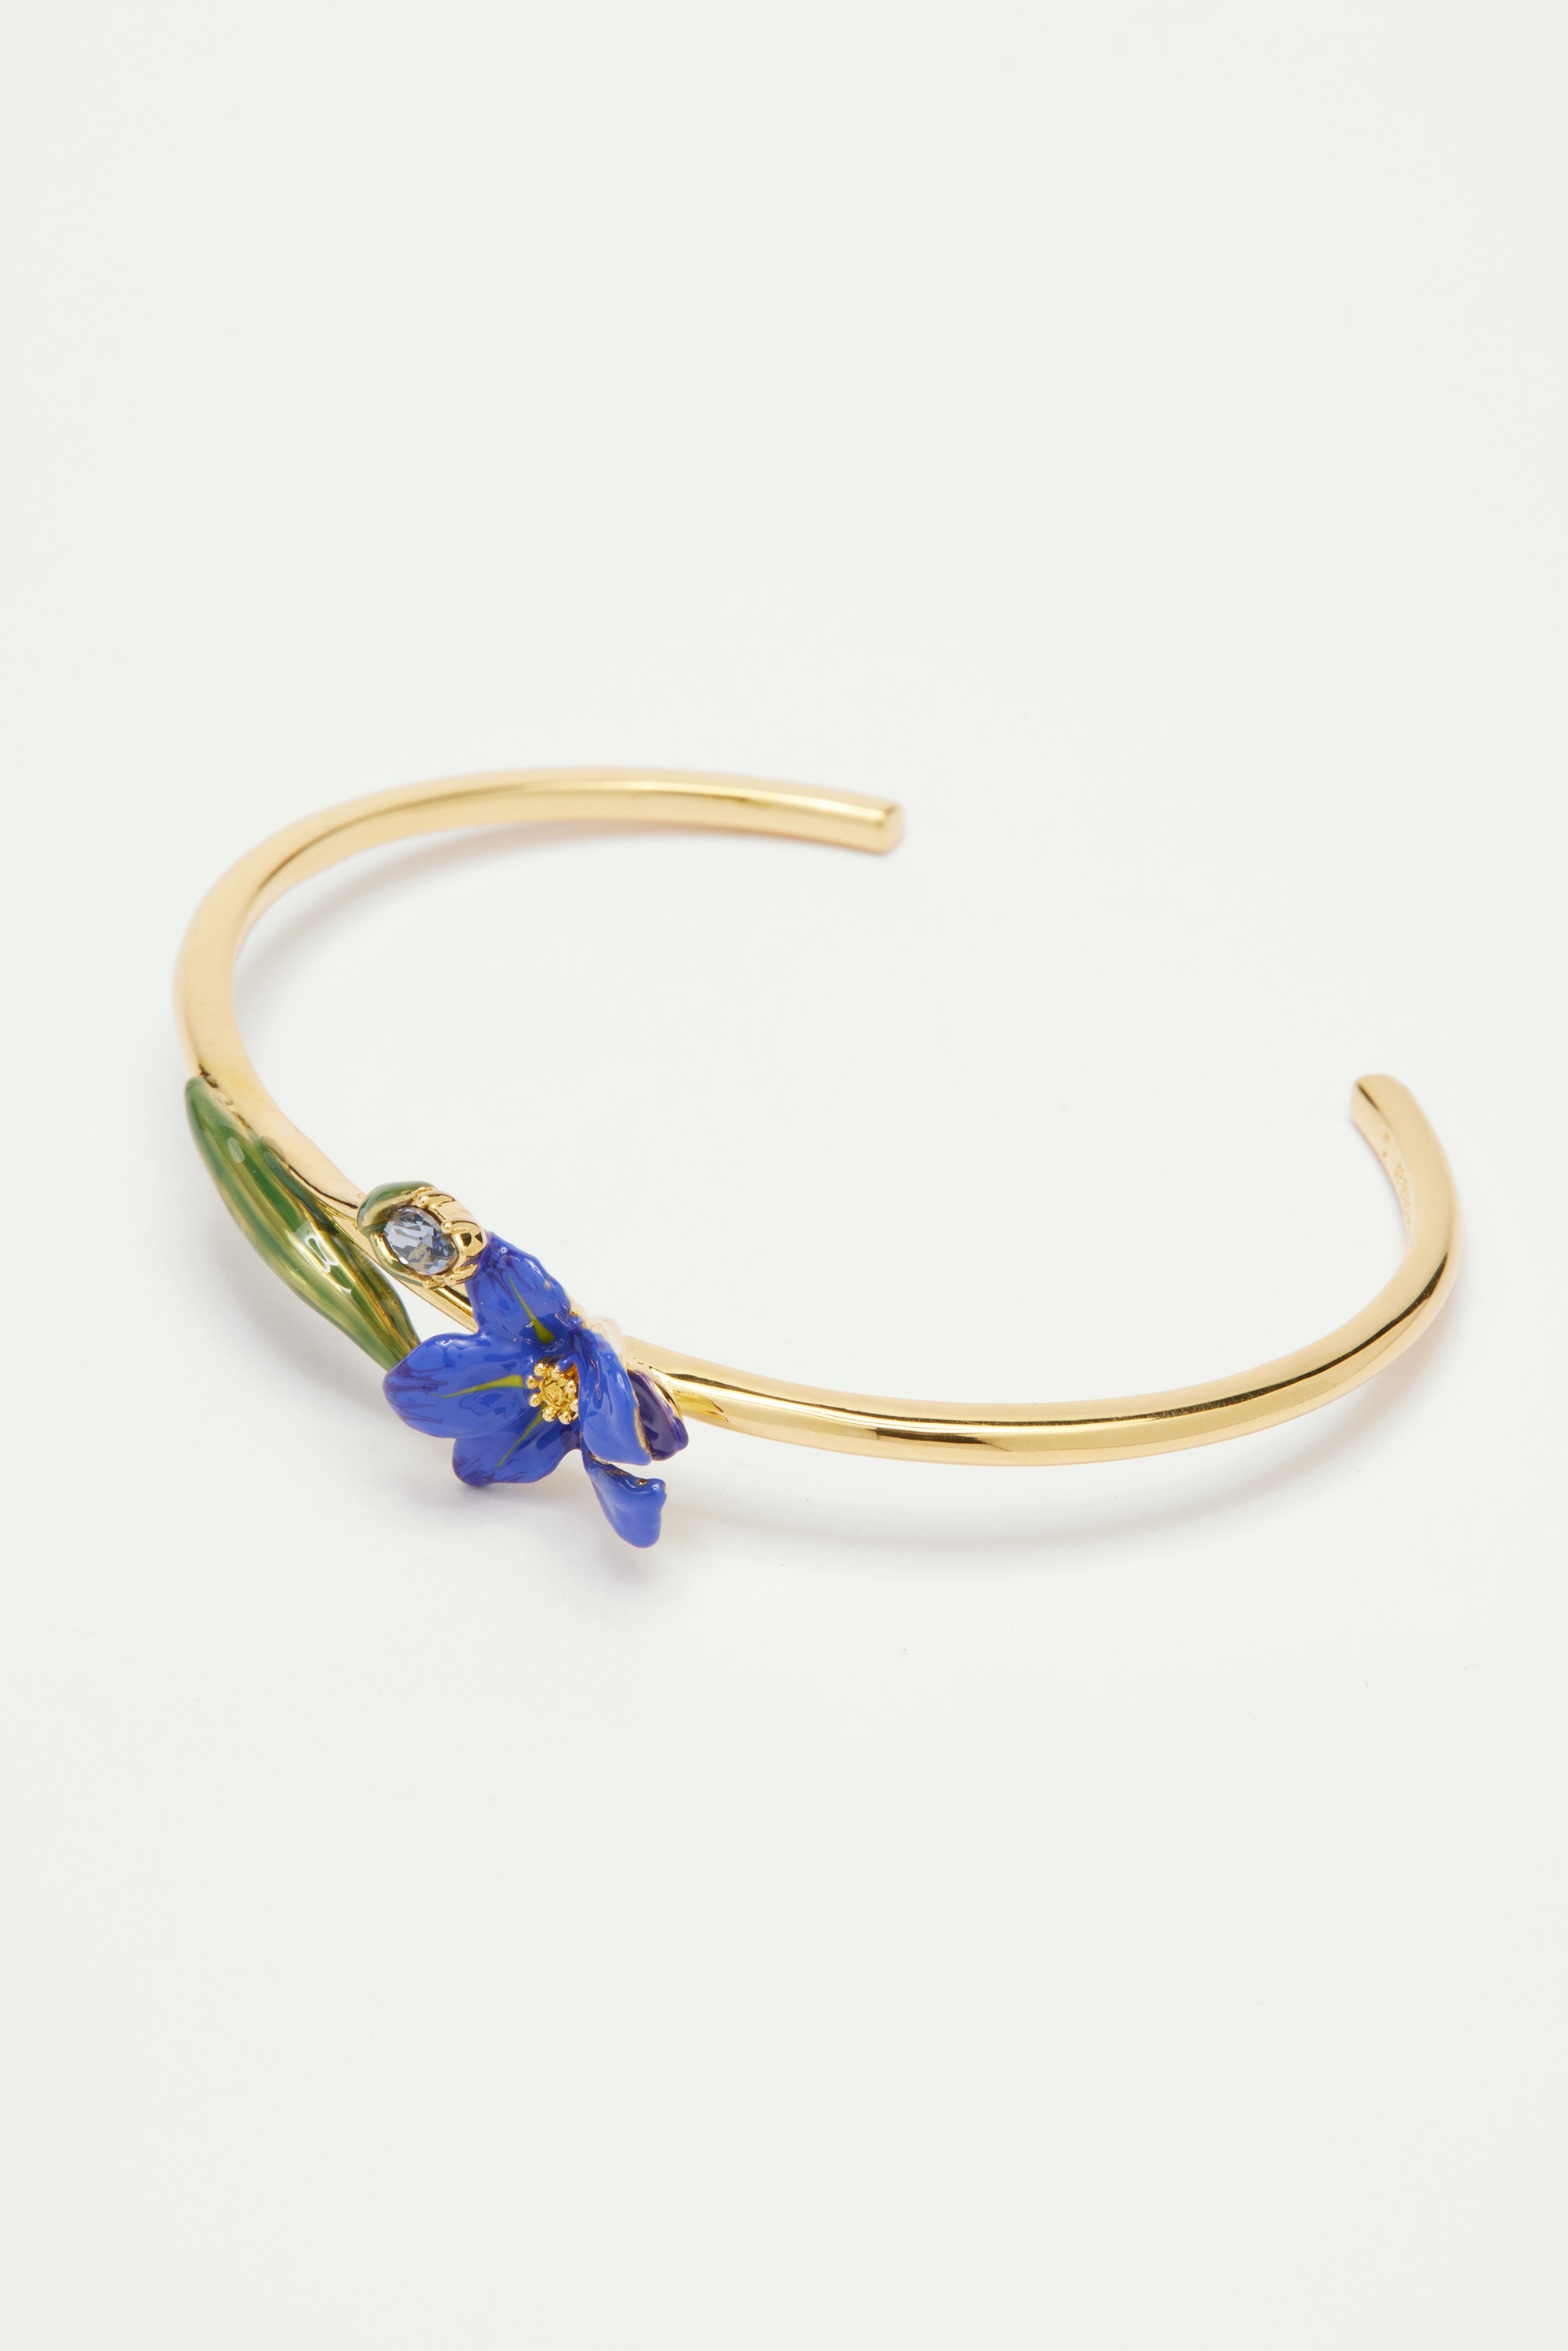 Siberian Iris and faceted glass bangle bracelet